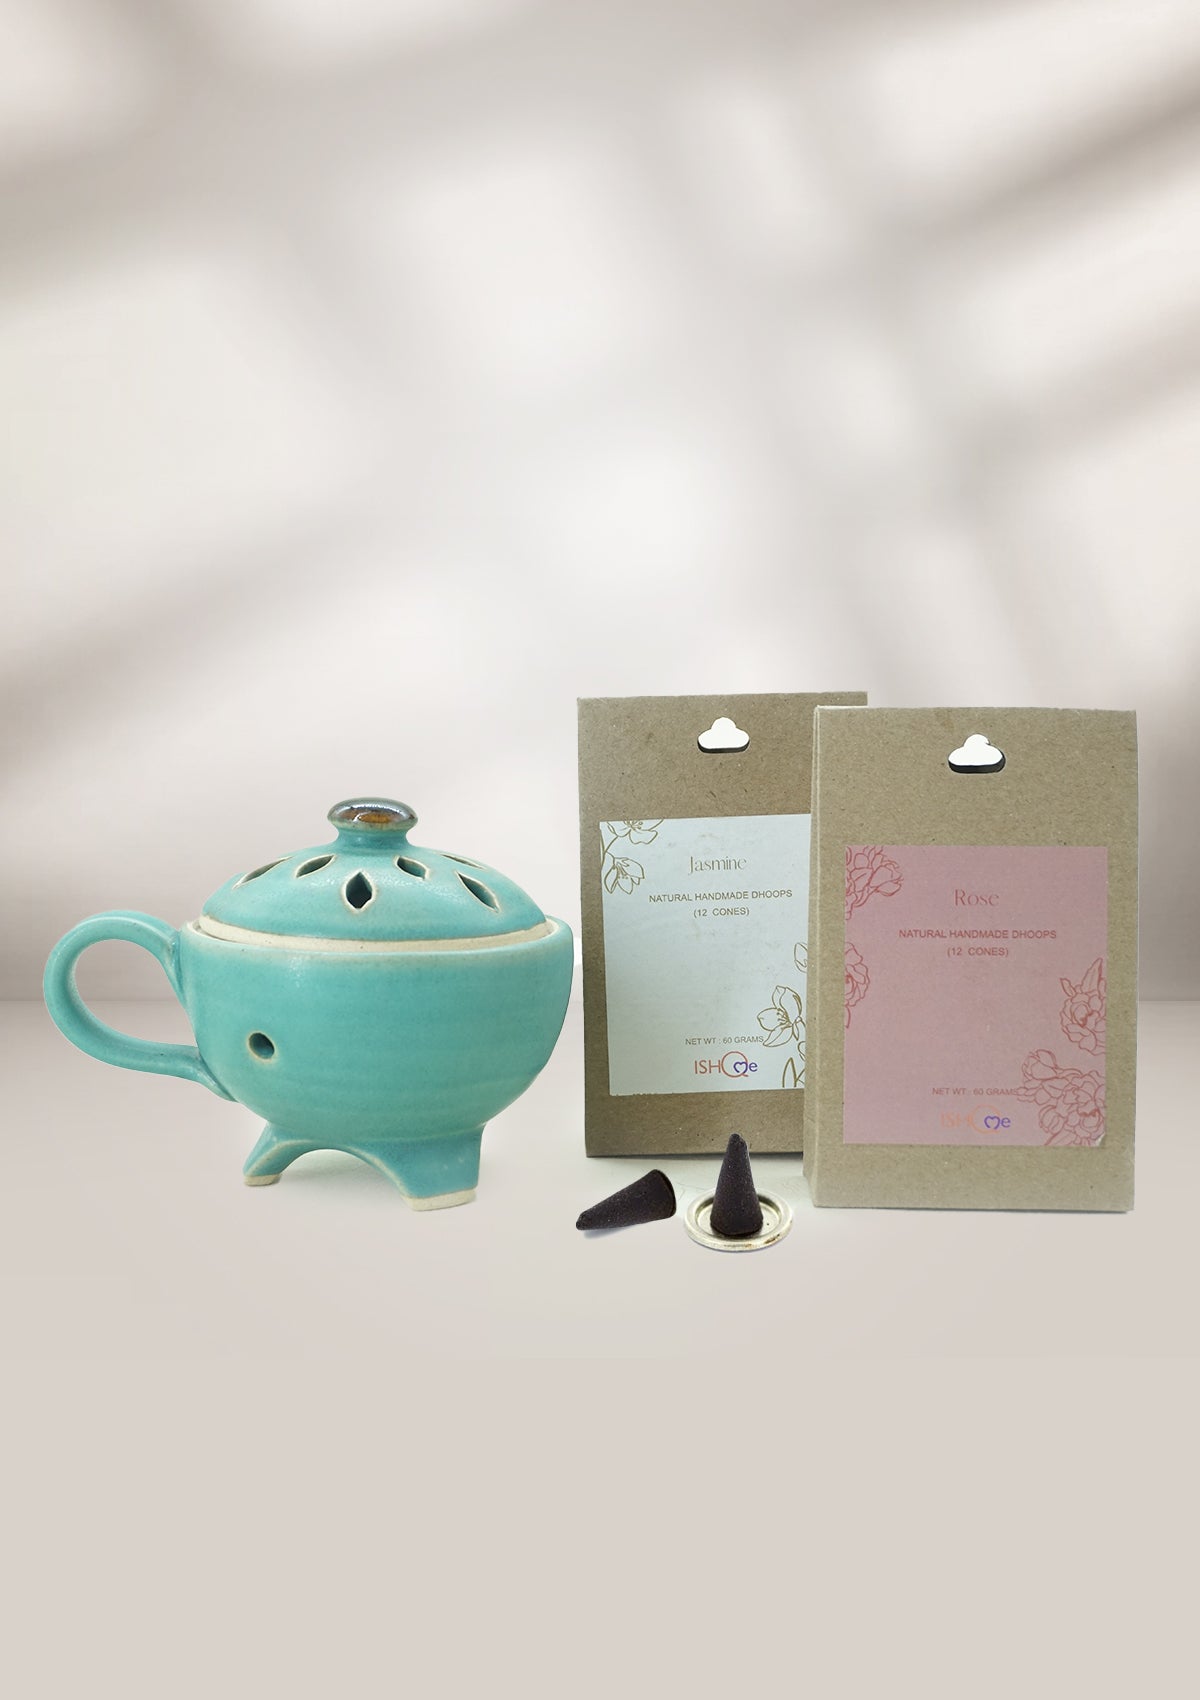 Fragrant Bliss: IshqMe's Rose and Jasmine Incense Cones with Deep Turquoise sea Stand - IshqMe